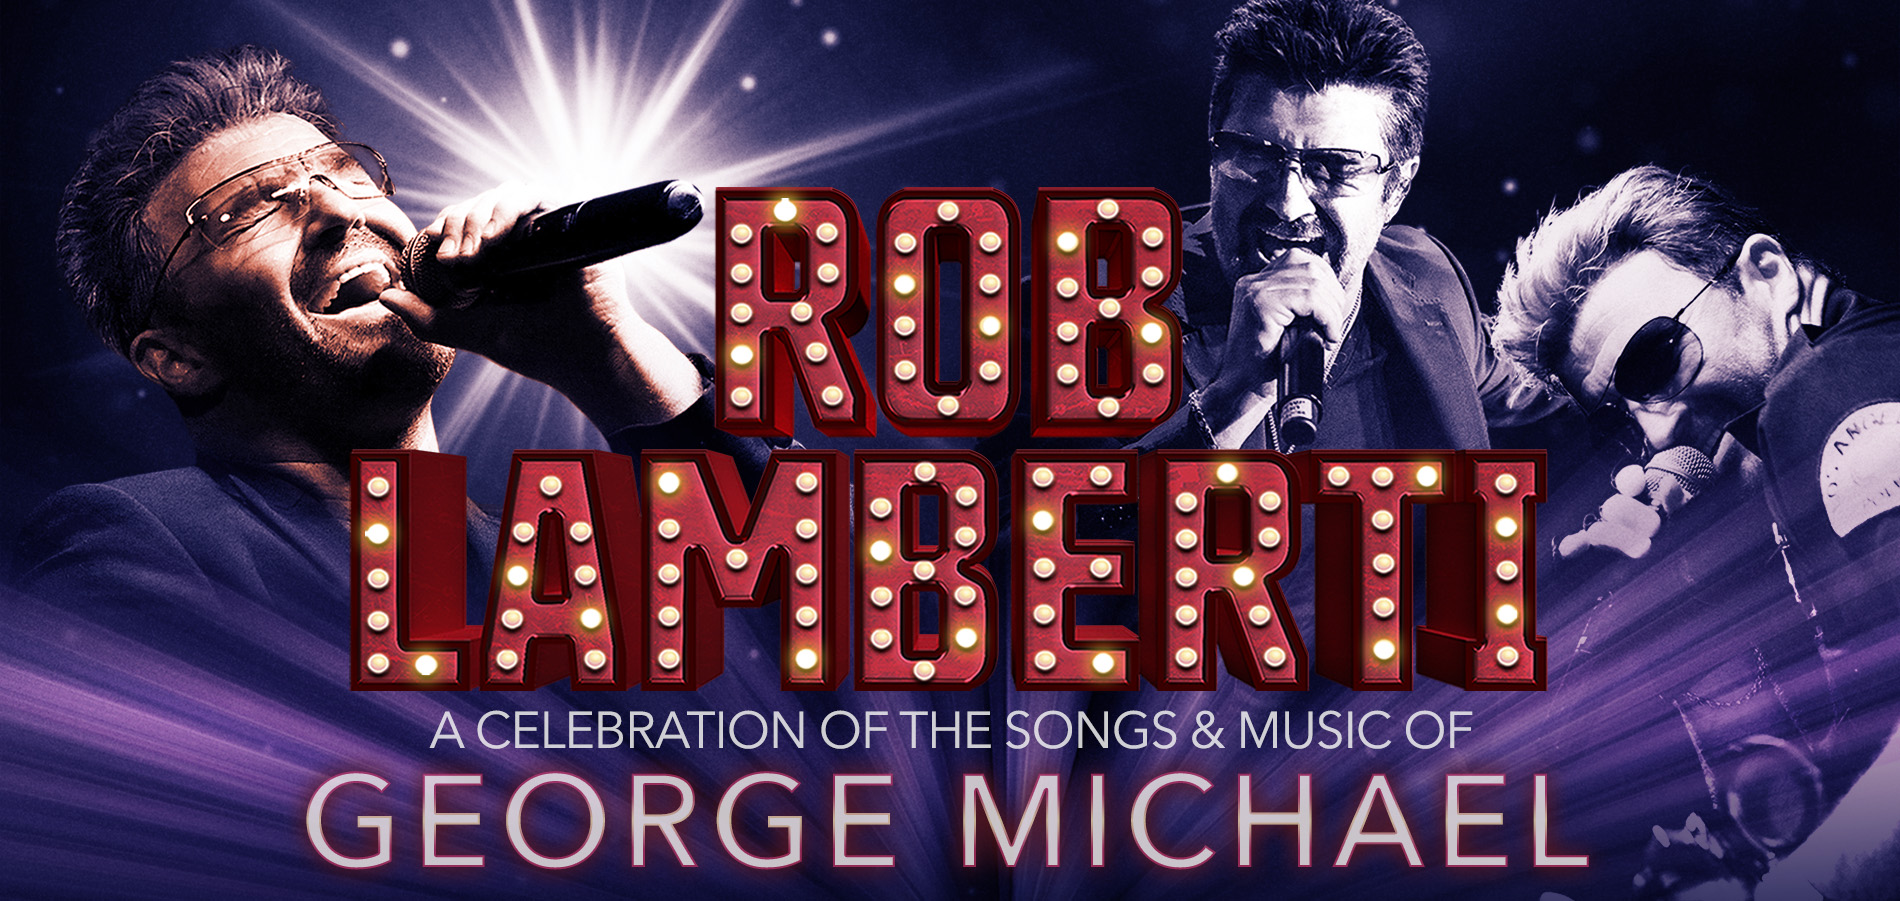 Robert Lamberti – A Celebration of the Songs and Music of George Michael